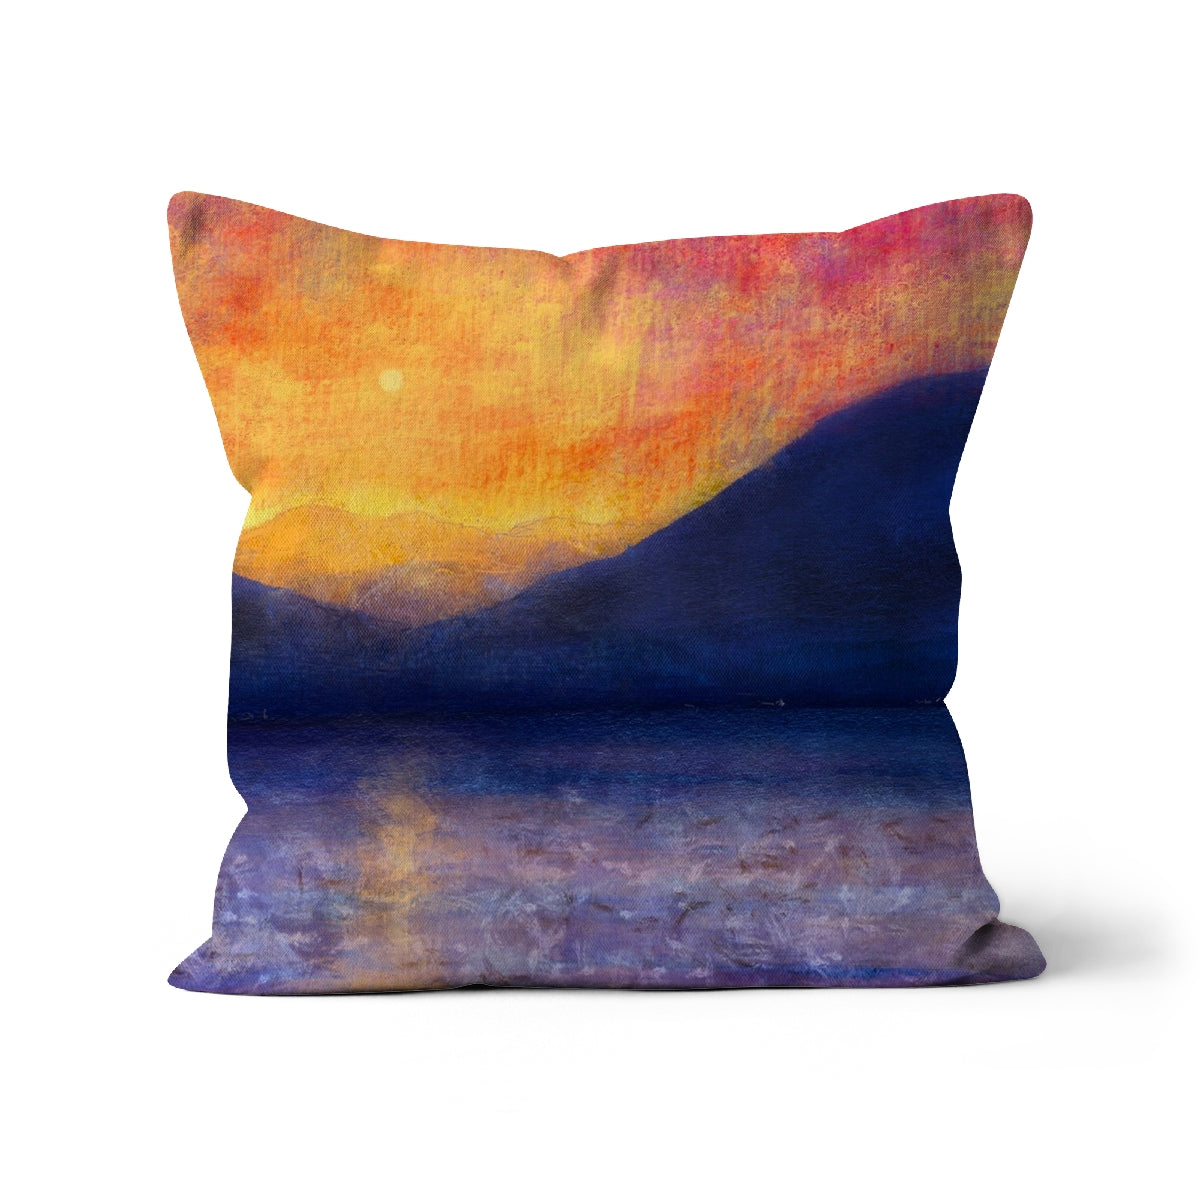 Sunset Approaching Mull Art Gifts Cushion-Cushions-Hebridean Islands Art Gallery-Faux Suede-12"x12"-Paintings, Prints, Homeware, Art Gifts From Scotland By Scottish Artist Kevin Hunter